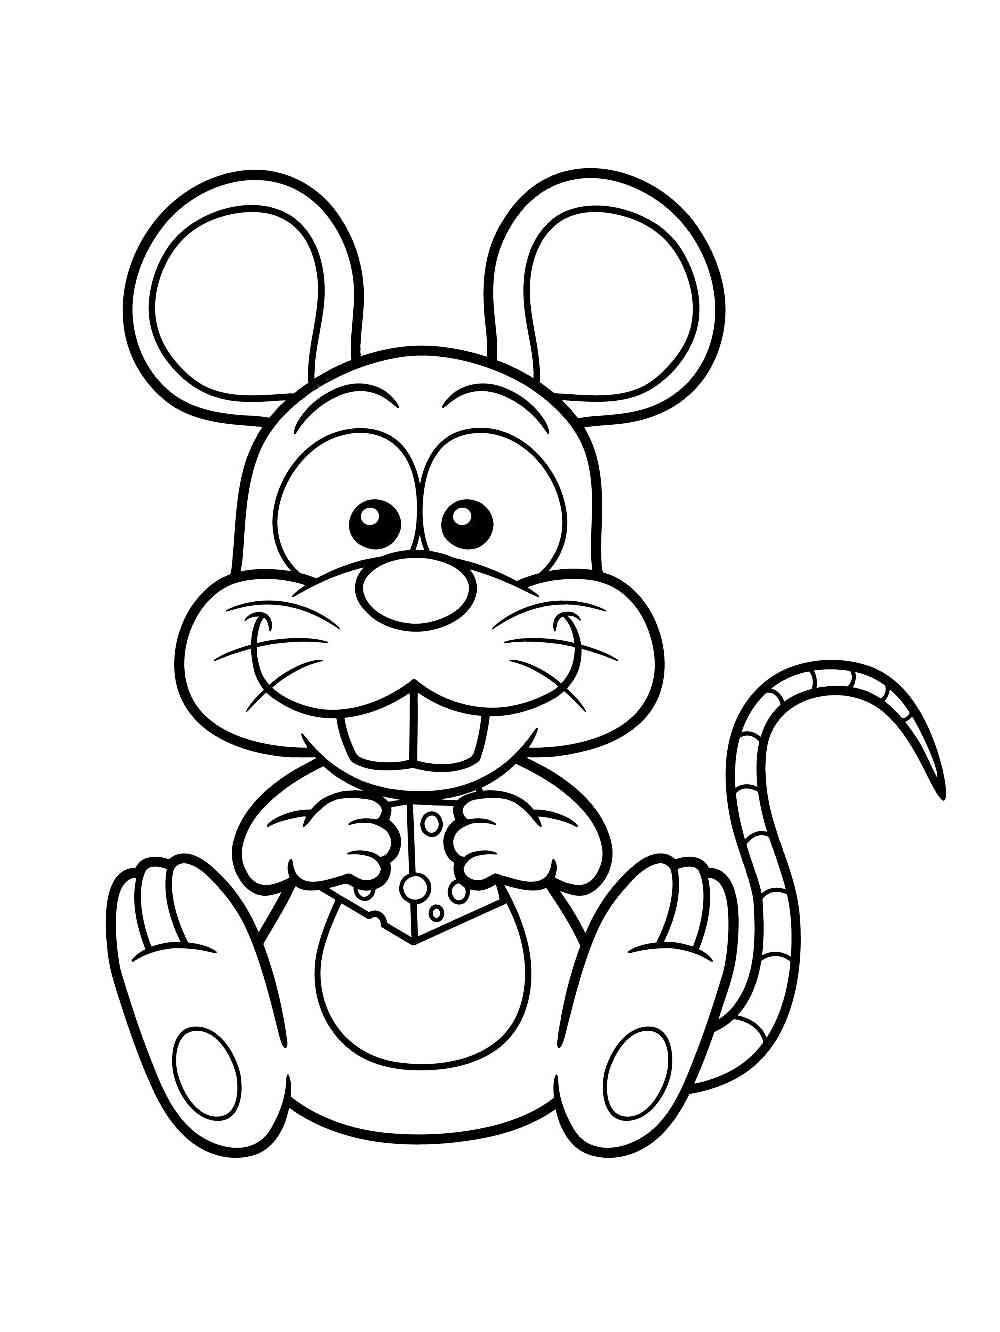 Happy Mouse and Cheese coloring page